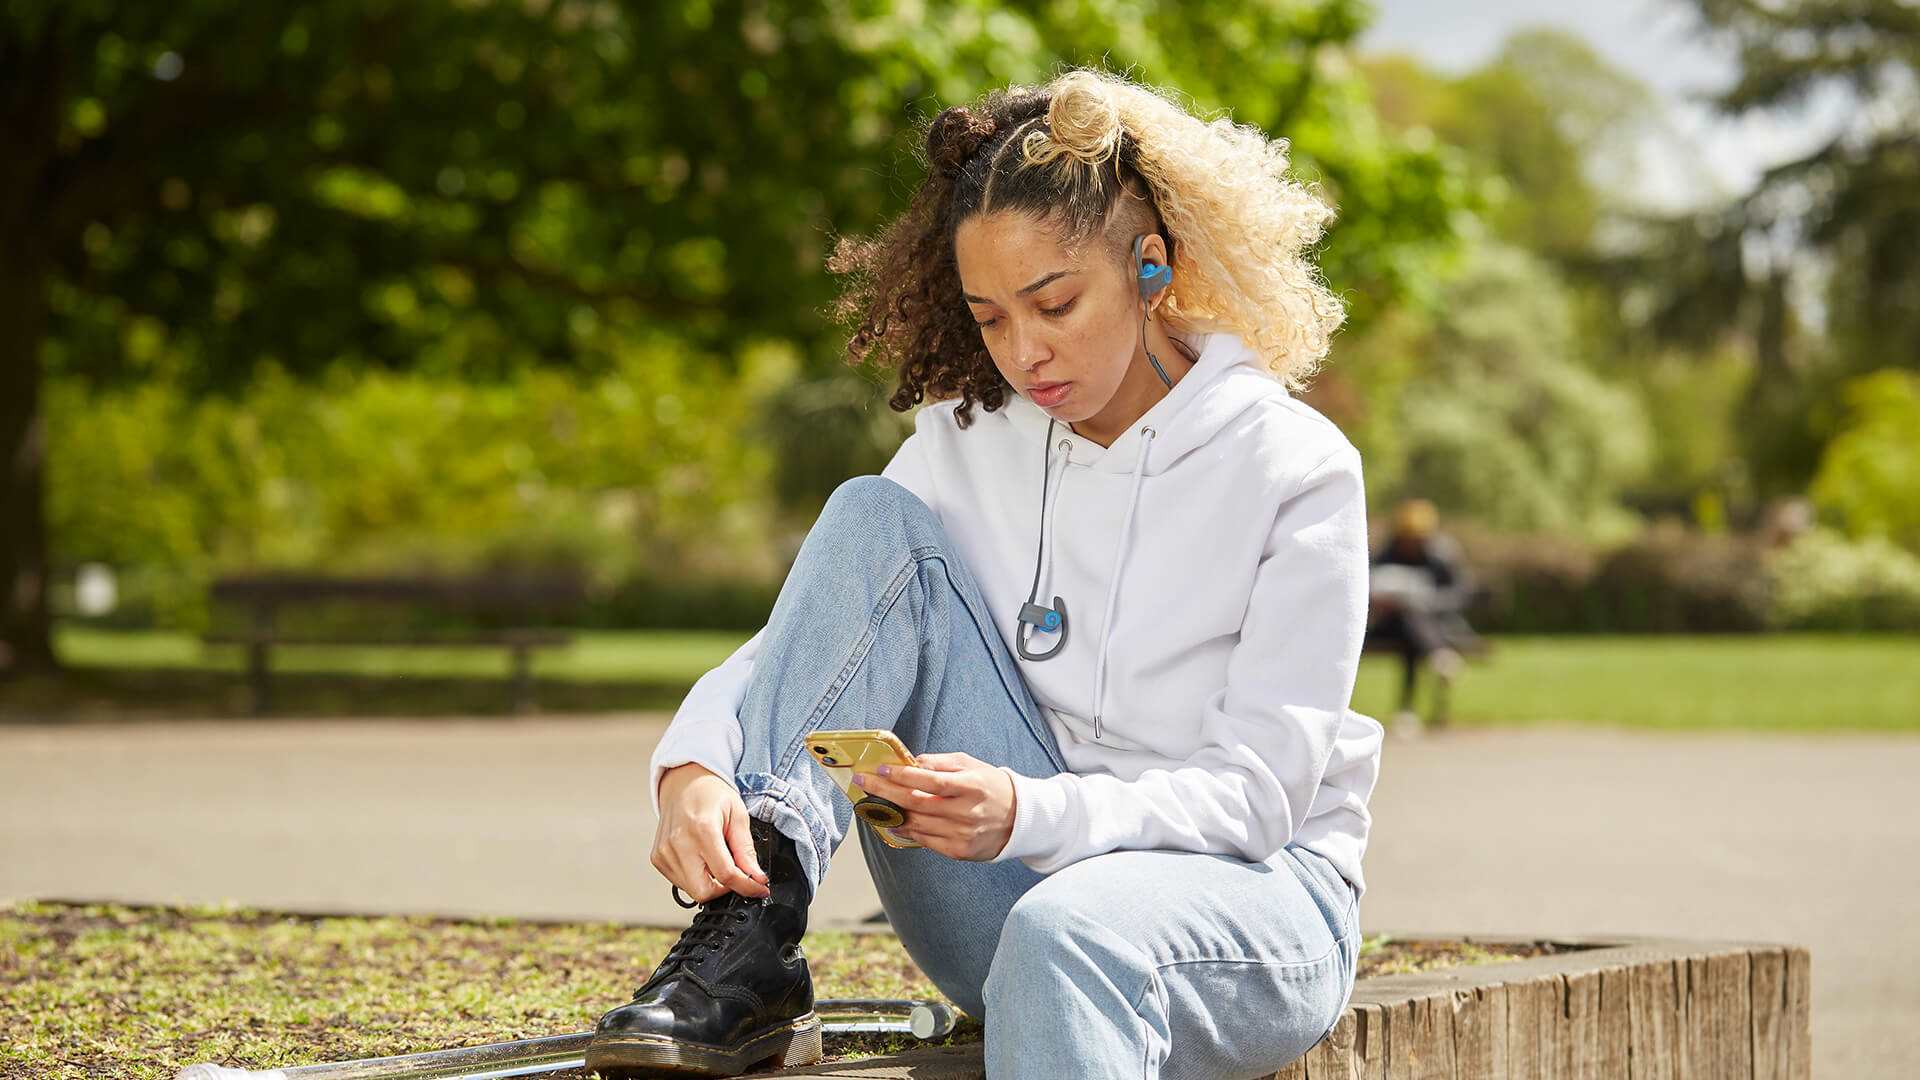 wide-shot-of-a-girl-with-headphones-and-looking-at-her-phones-while-sitting-in-the-park